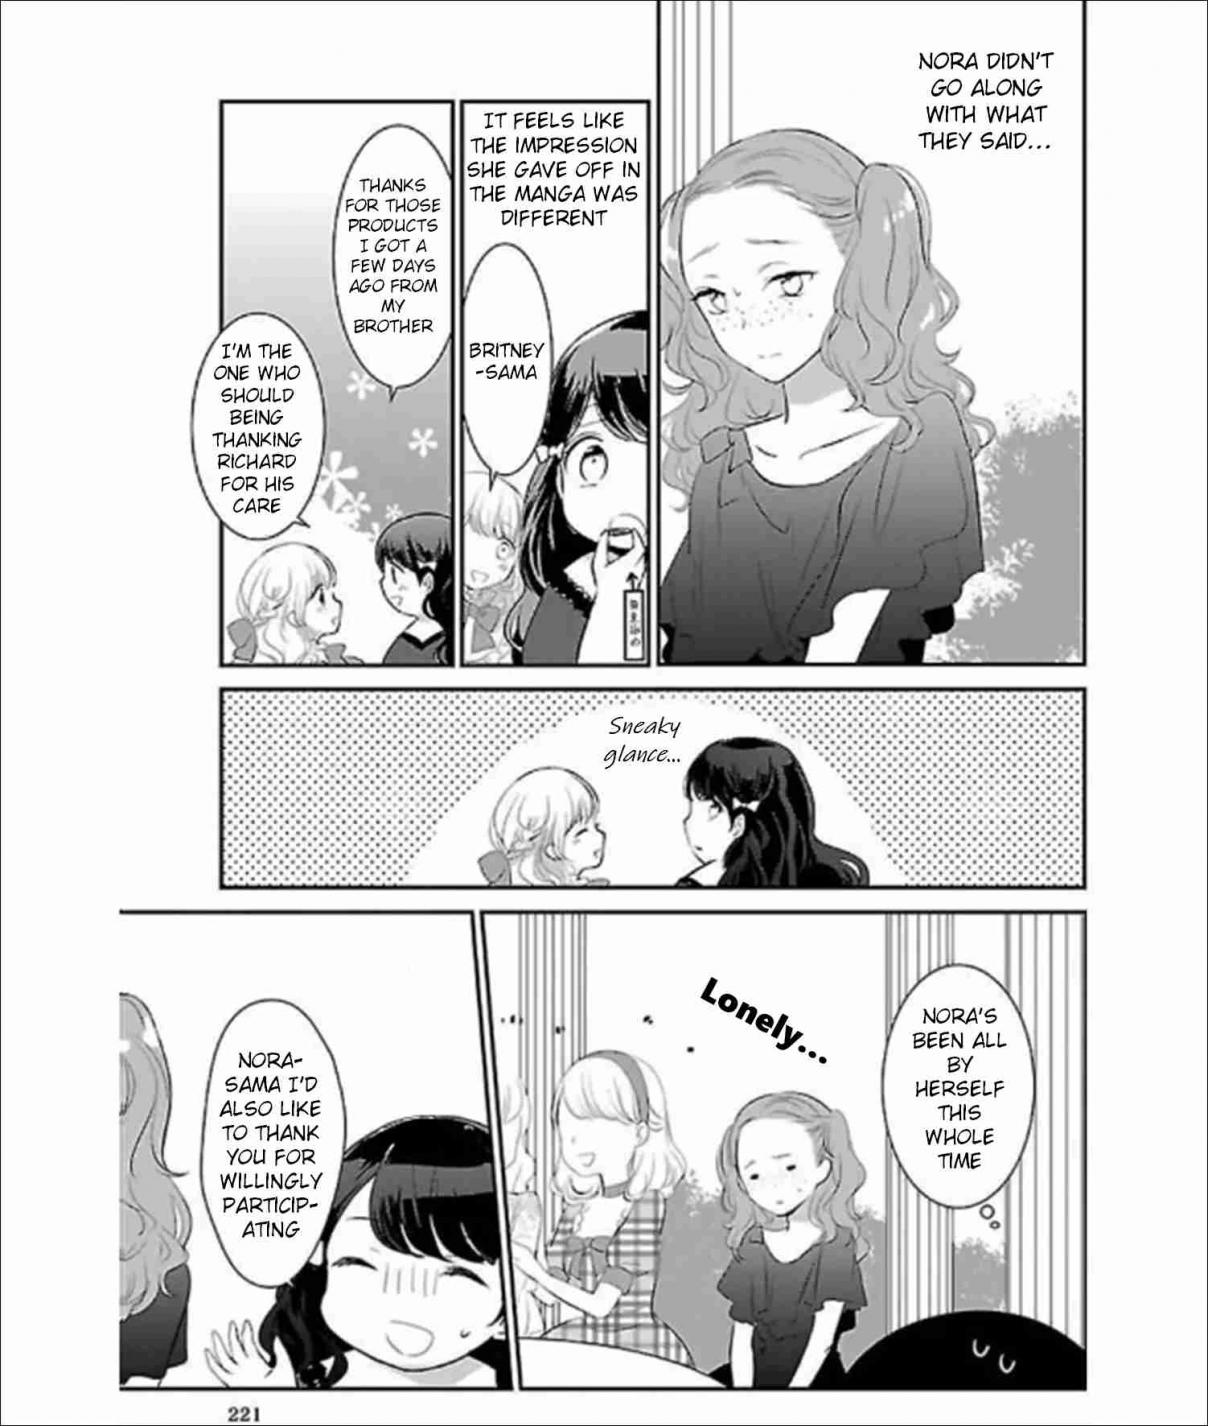 I Reincarnated as a White Pig Noble's Daughter from a Shoujo Manga Vol. 2 Ch. 4.1